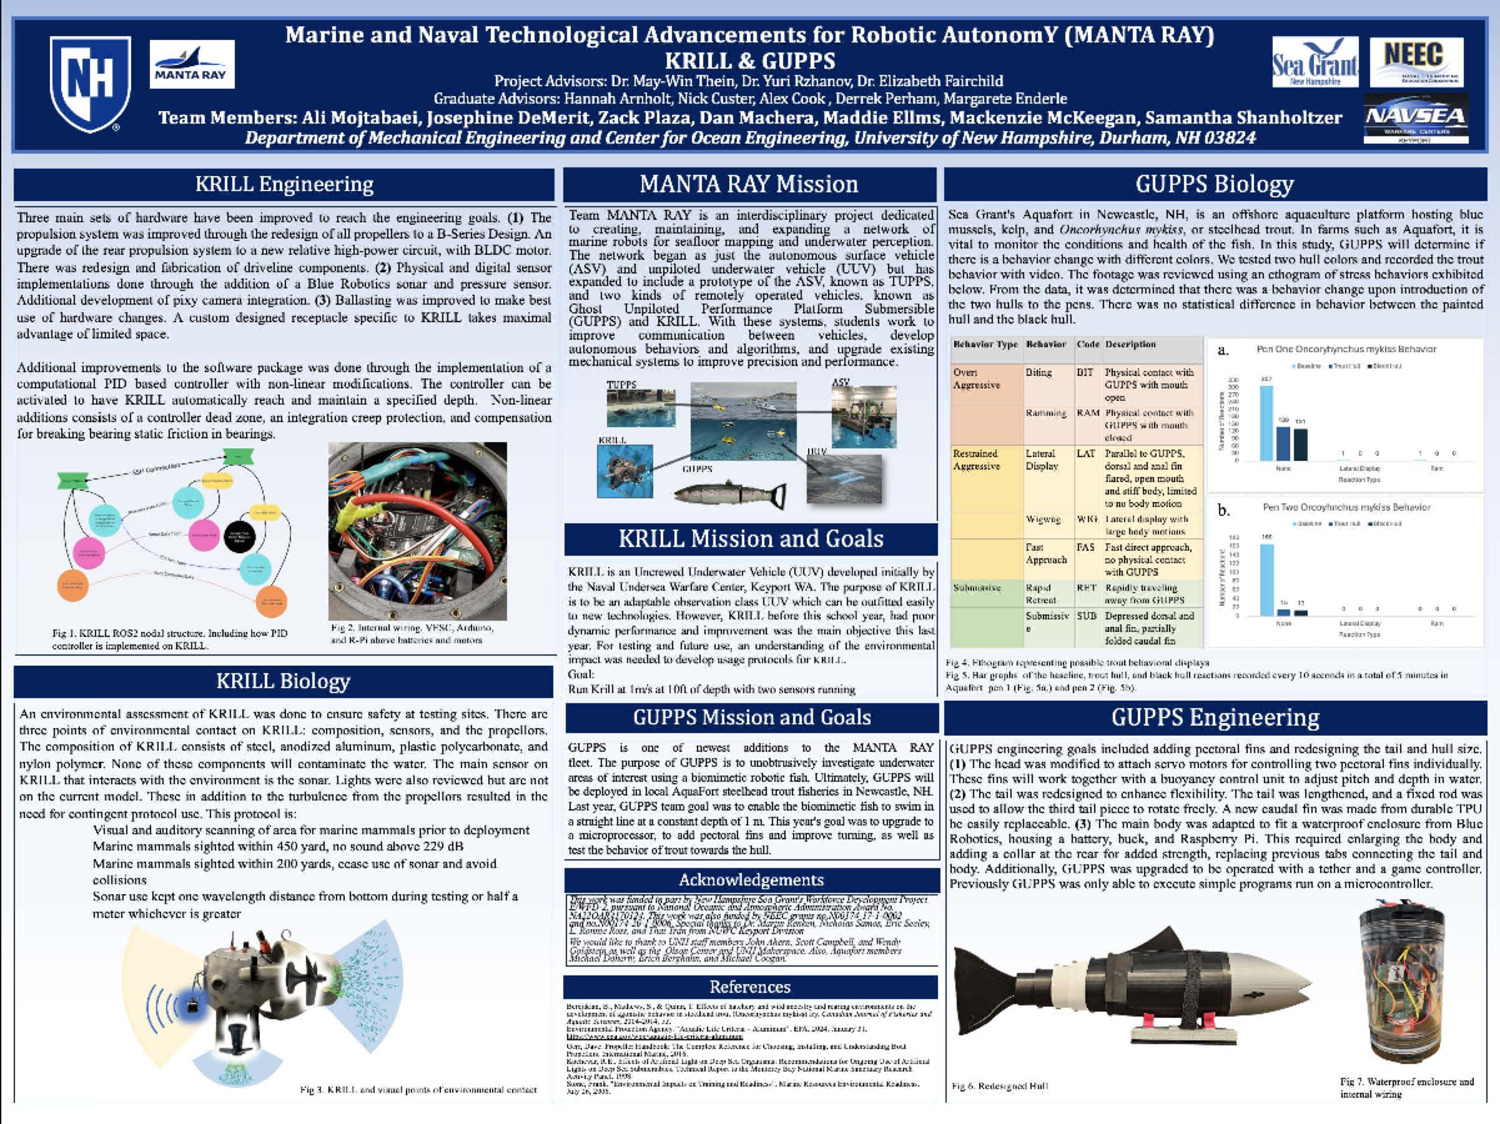 Marine And Naval Technological Advancements For Robotic Autonomy (Manta Ray) Krill & Gupps by jcd1091